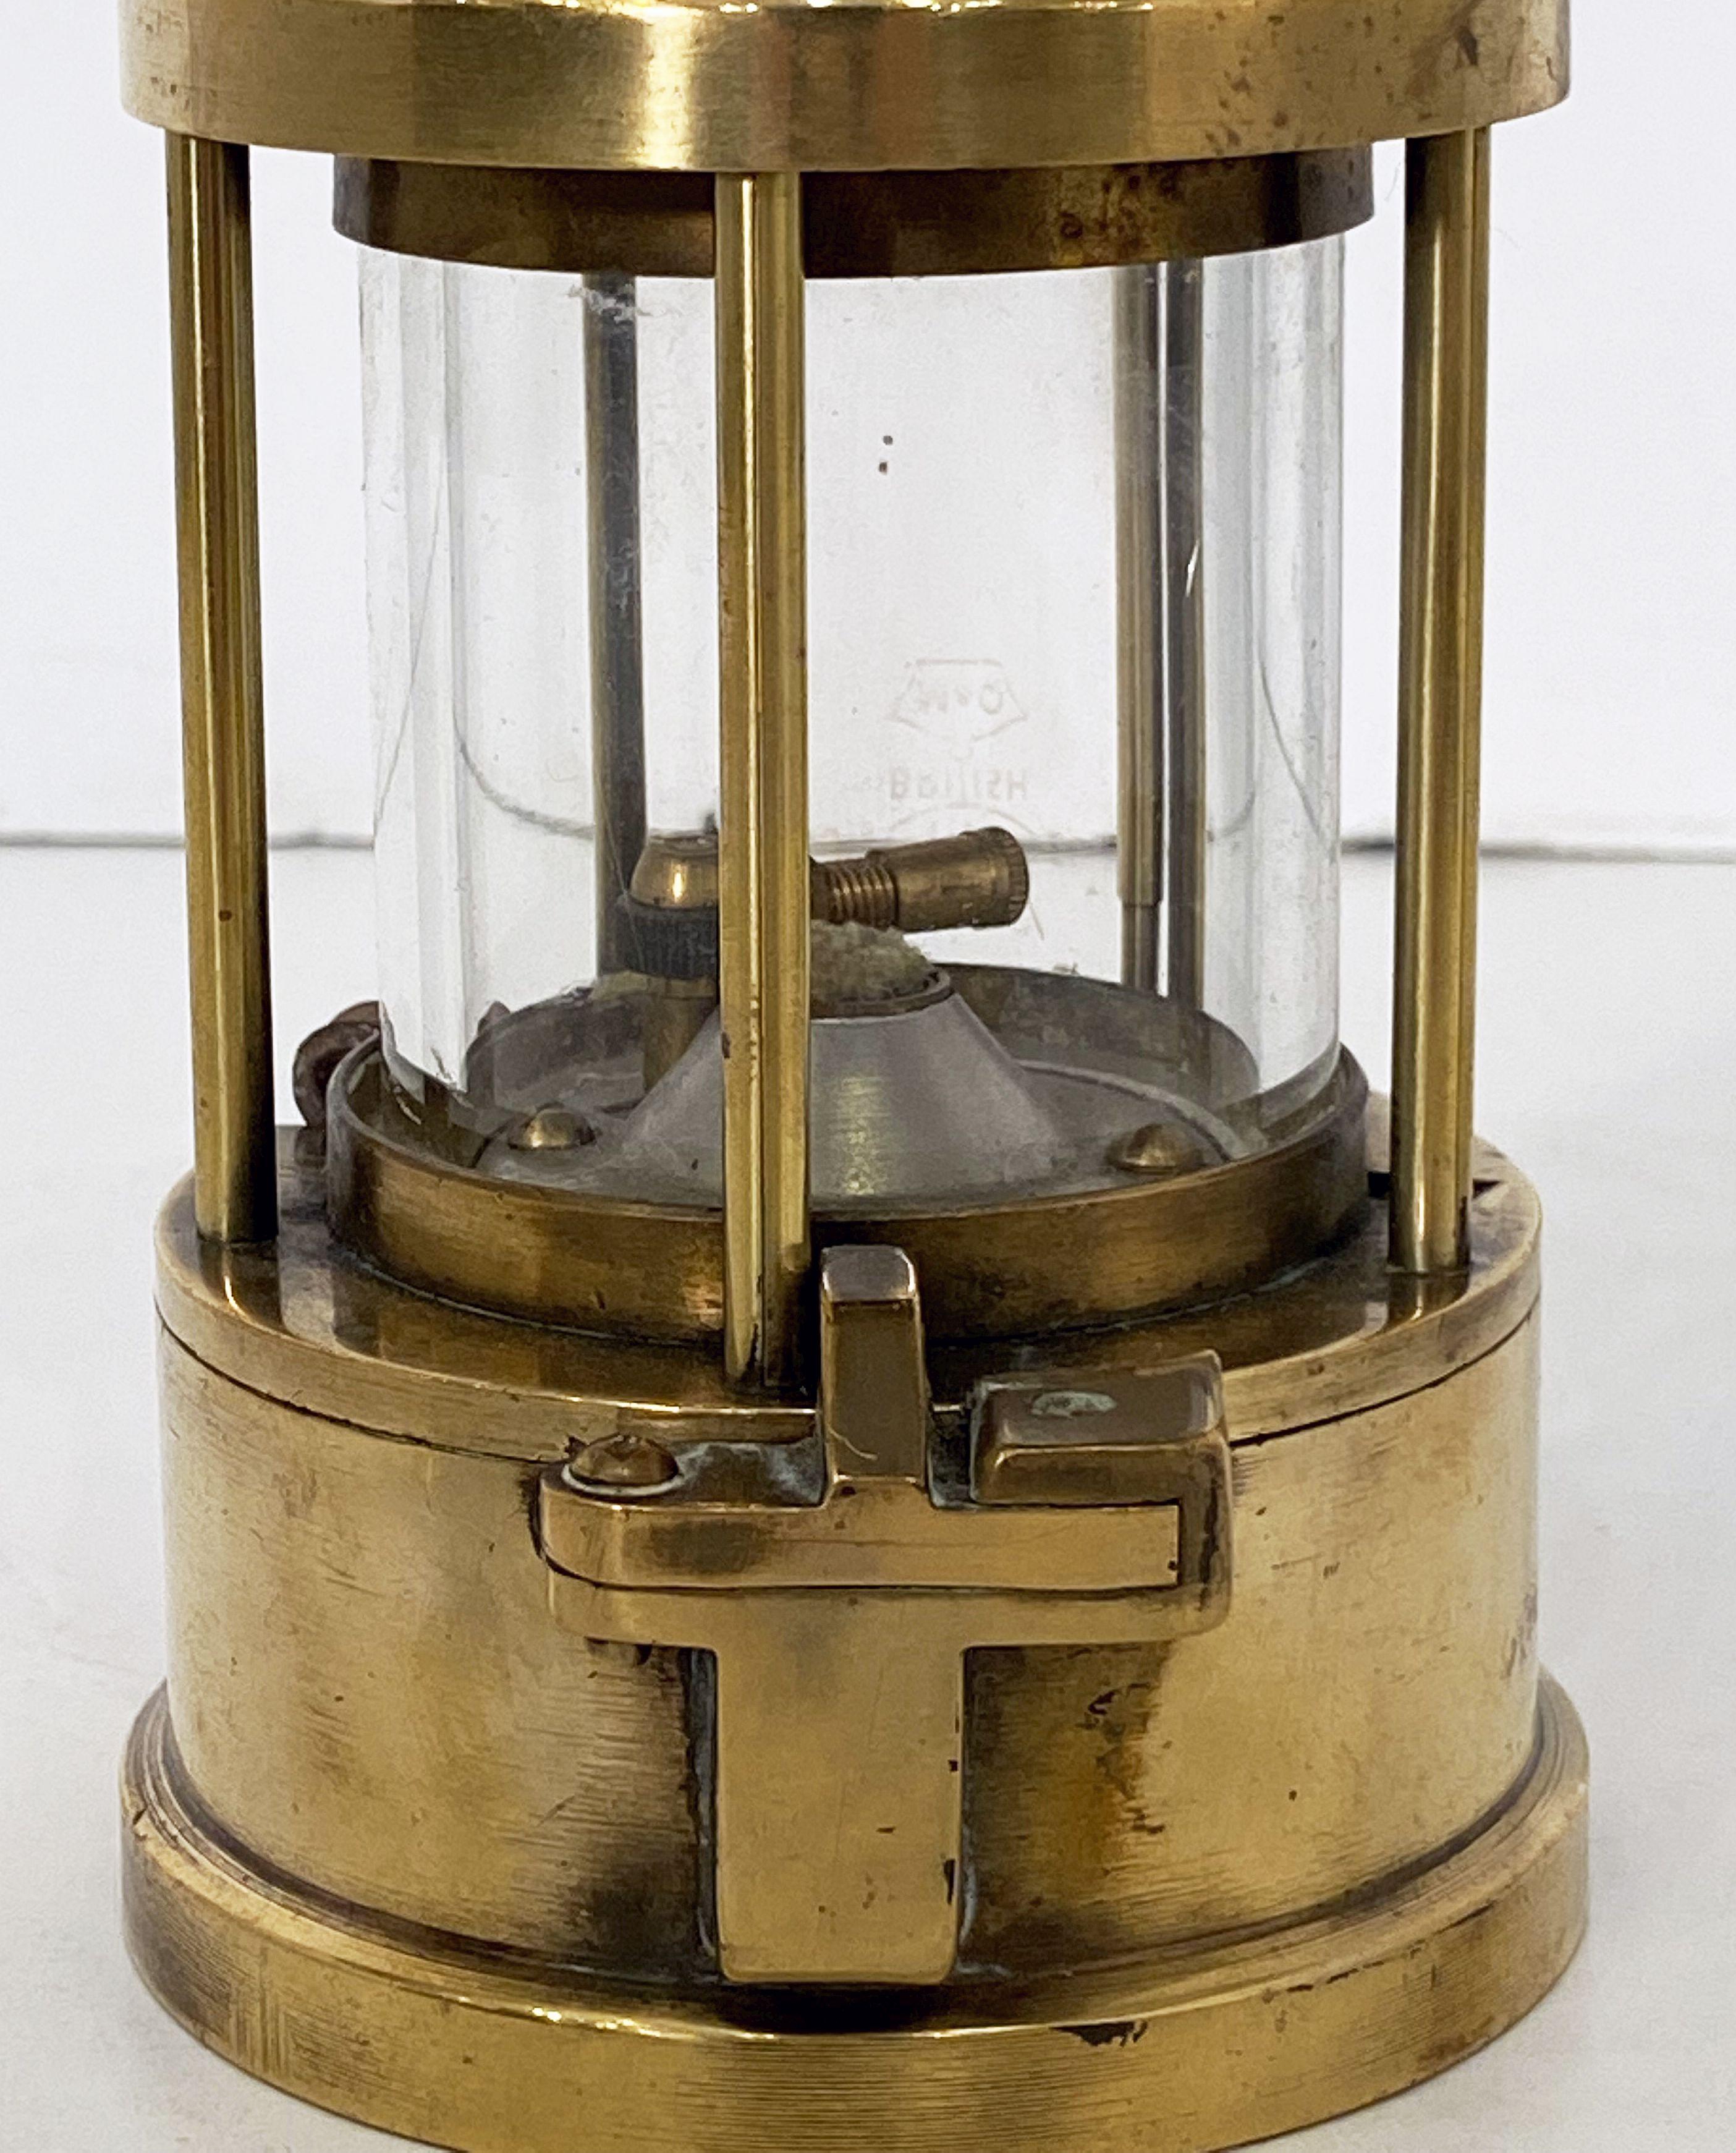 20th Century English Coal Miner's Safety Lamp or Inspector's Lantern of Brass